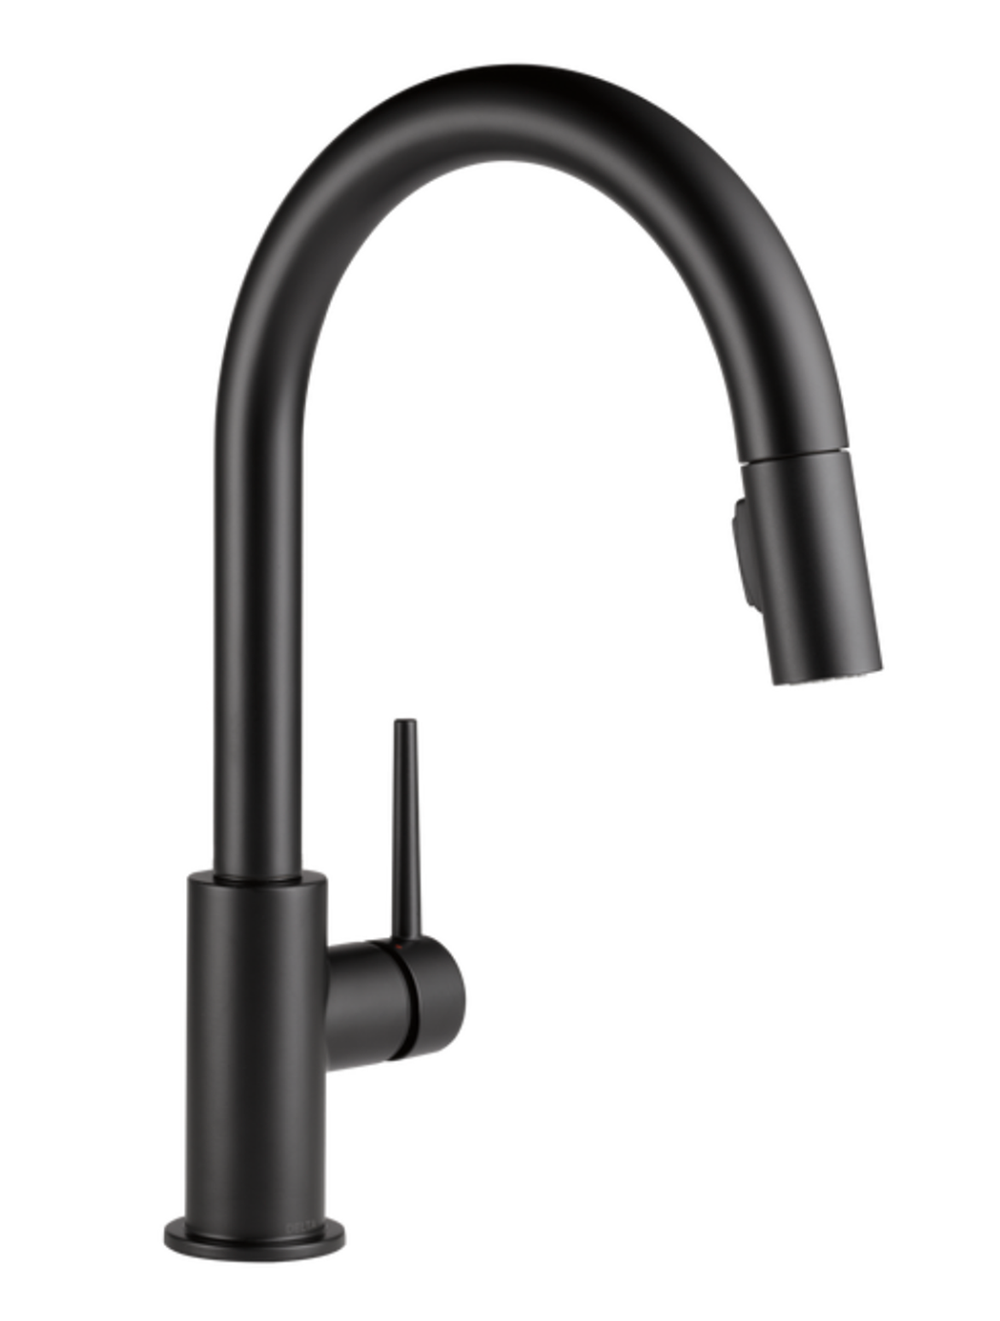 Delta Trinsic Single Handle Pull-down Faucet Image